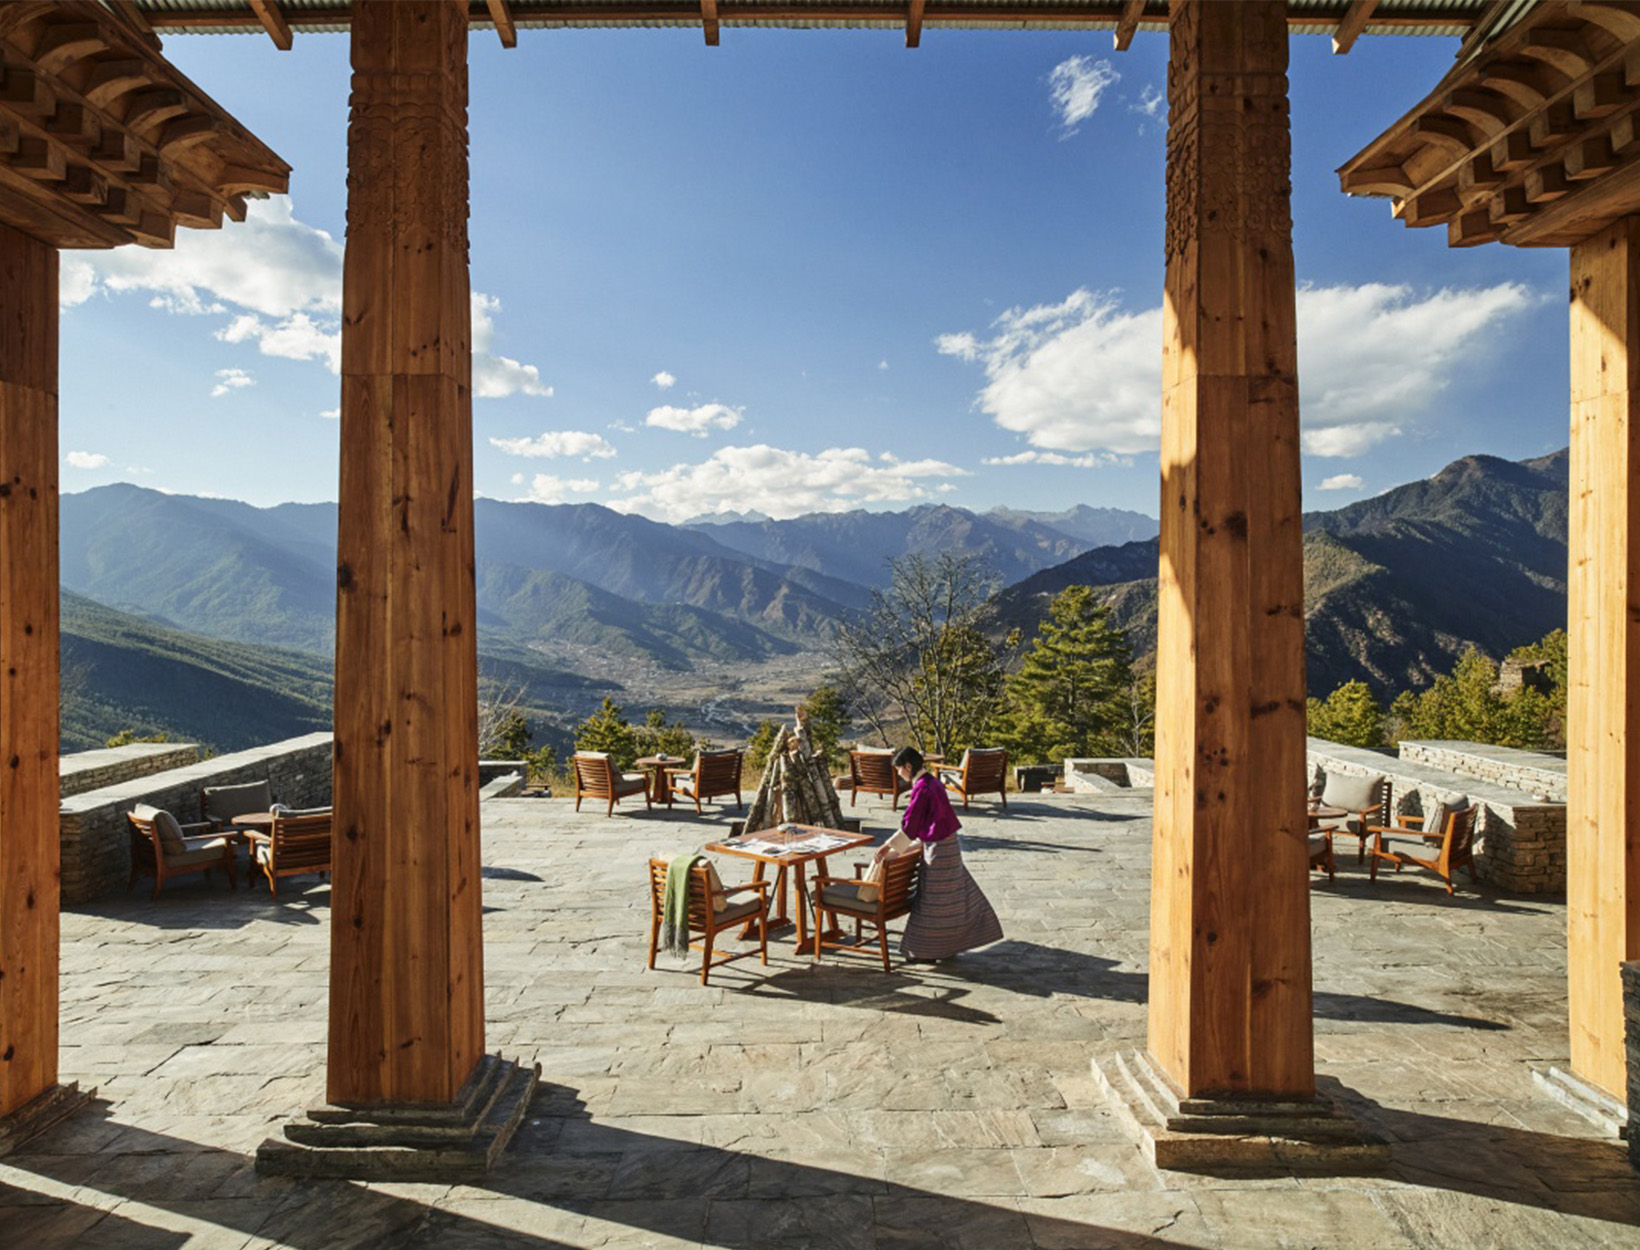 Six Senses Bhutan<br /><em>Bhutan</em>“/>
<div>
<h3>6 Senses Bhutan<br /><em>Bhutan</em></h3>
<p>Six Senses Bhutan is composed of five attributes sprinkled all over the Himalayas: Thimphu, just outside the house Bhutan’s money city Punakha, in Bhutan’s warm, sunny farming area Paro, a stony fortress surrounded by mountain peaks Bumthang, in primary forest-bathing territory and Gangtey, in a glacial valley which is house to black-necked cranes. You can go to a single lodge, if you’d like. Or e-book a bespoke journey by way of the state, hitting up Bhutan’s markets, museums, and monasteries as you make your way to every single of the lodges.</p>
<p style=